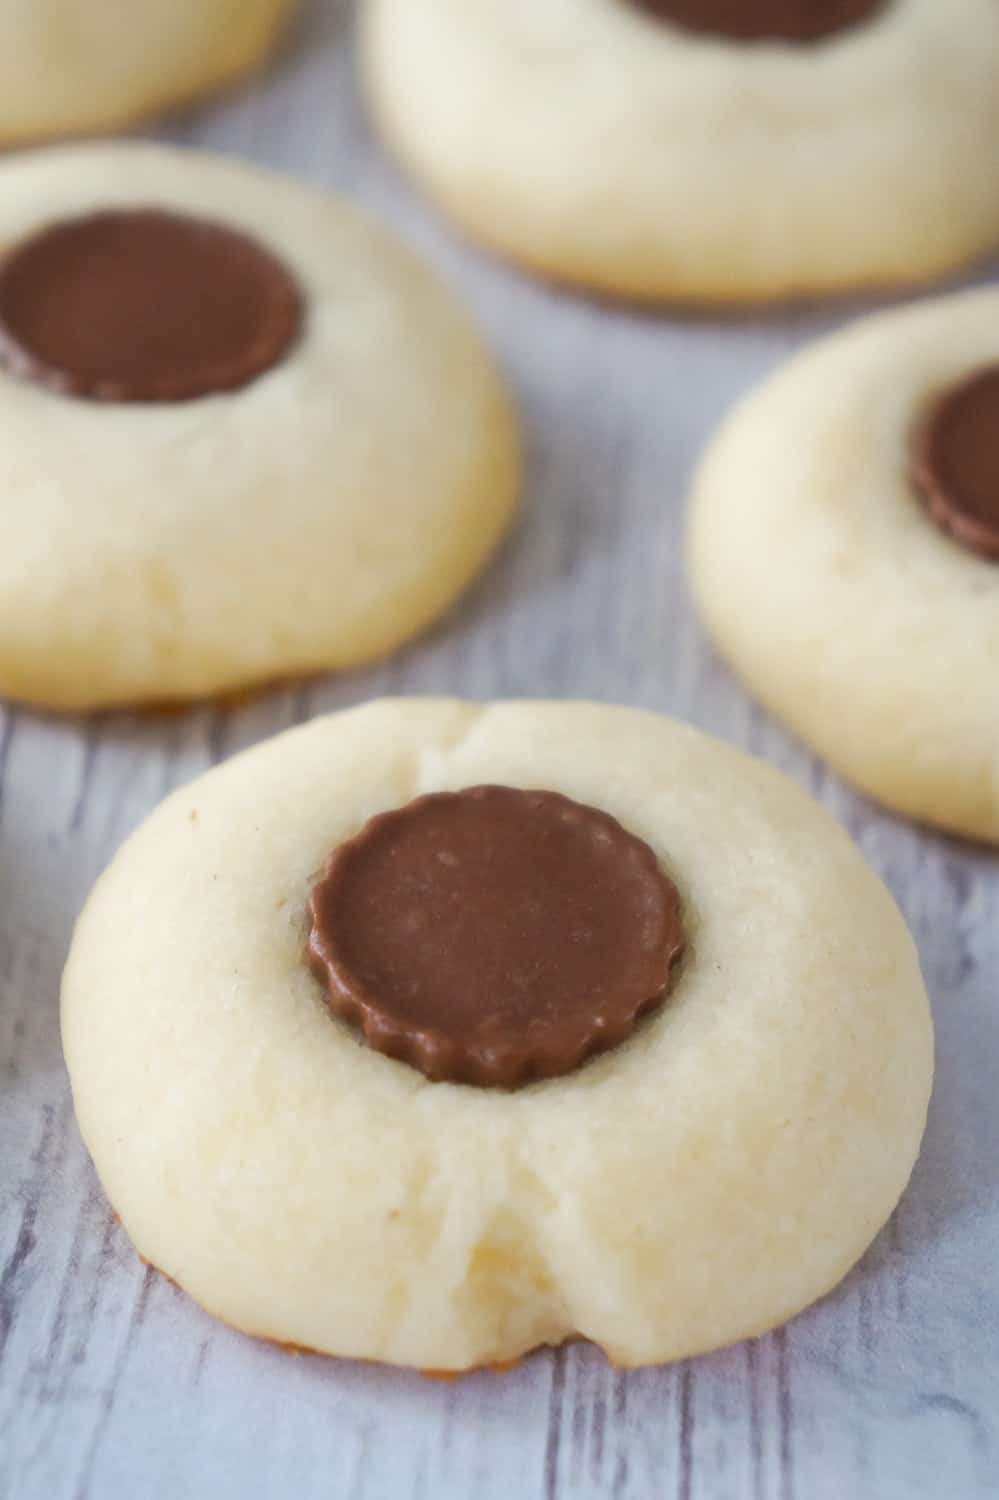 Whipped Shortbread with Peanut Butter Cups is an easy cookie recipe perfect for the holidays. These classic whipped shortbread cookies topped with Reese's Minis are sure to please the peanut butter lovers in your life.